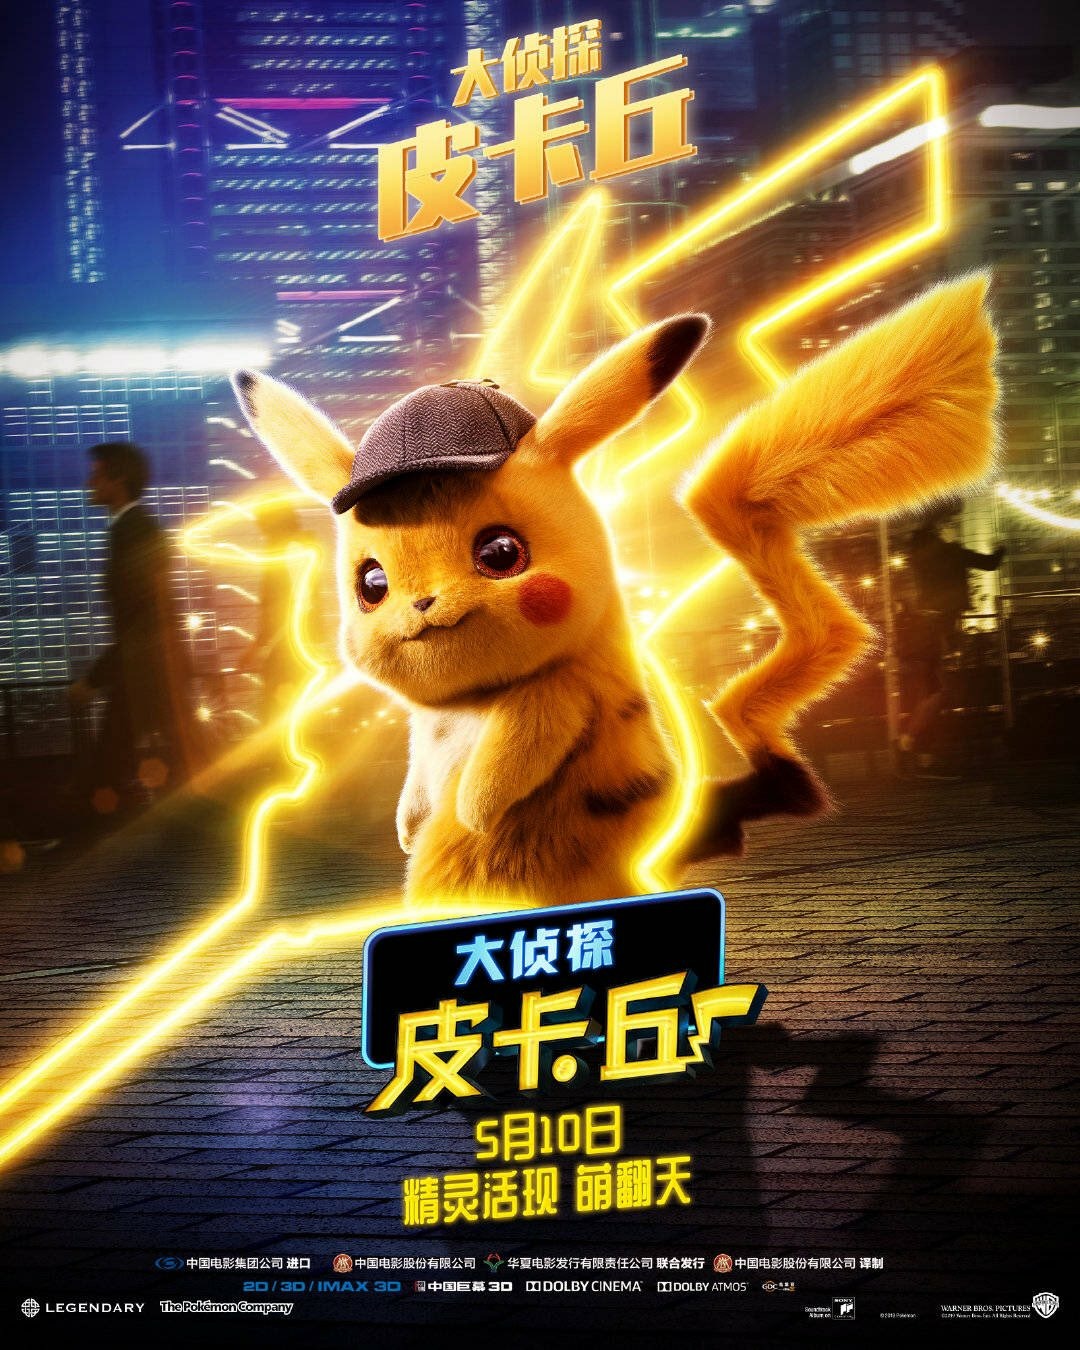 Extra Large Movie Poster Image for Pokémon Detective Pikachu (#6 of 26)